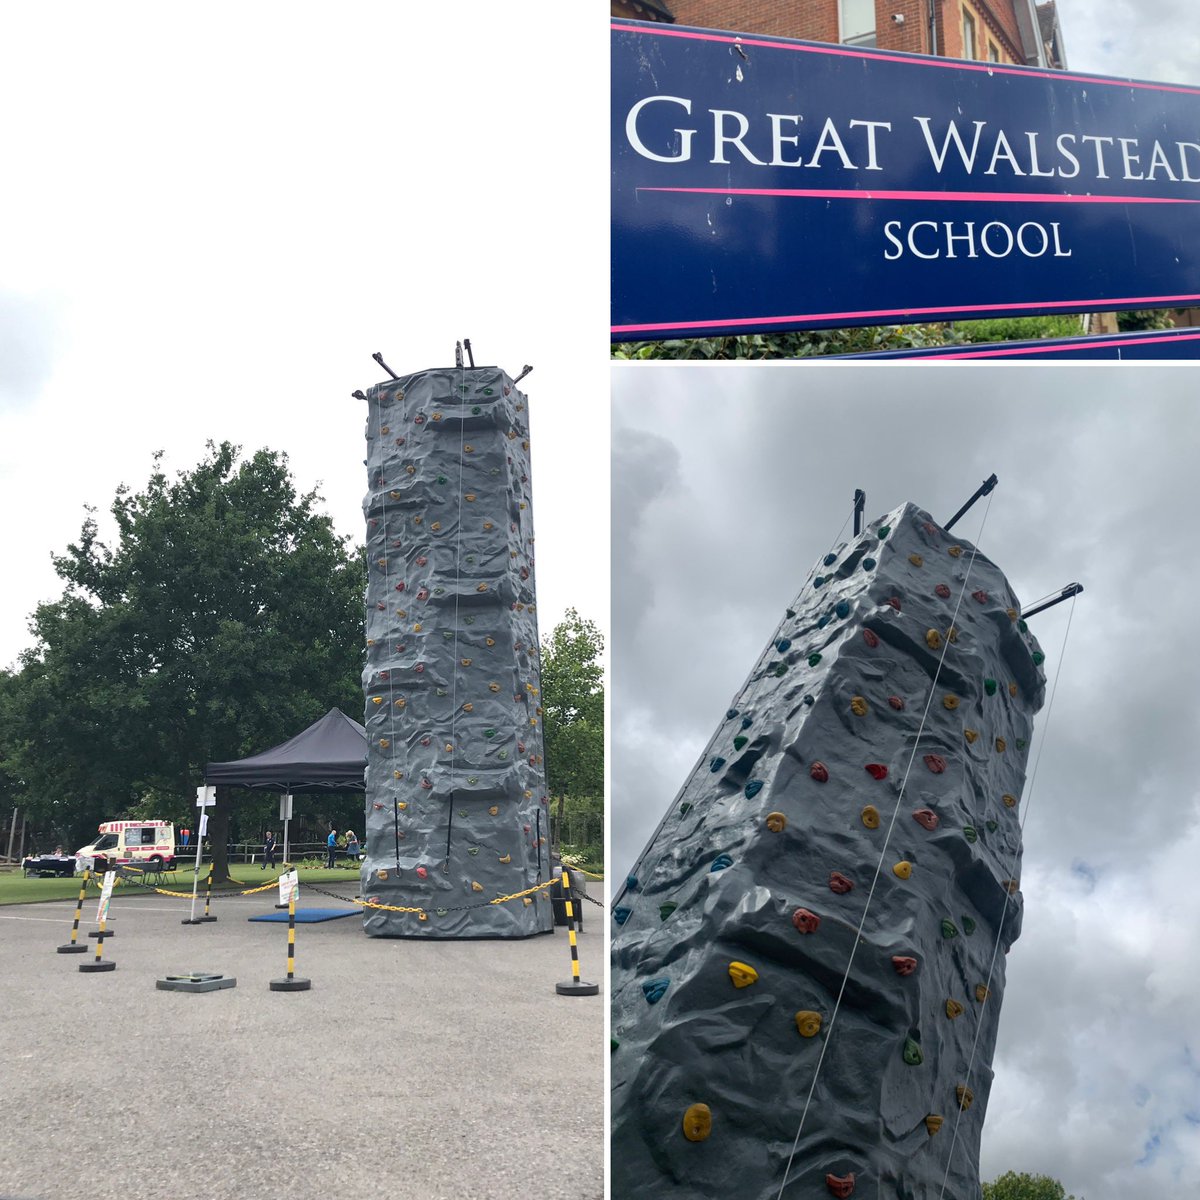 Our Mobile Rock Climbing Wall for a school fun day at @greatwalstead in Hayward’s Heath. 
.
.
.
#mobileclimbingwall #mobileclimbingtower #rockclimbing #rockwall #schoolevents #schoolactivityday #schoolfunday #familyfunday #summerevents